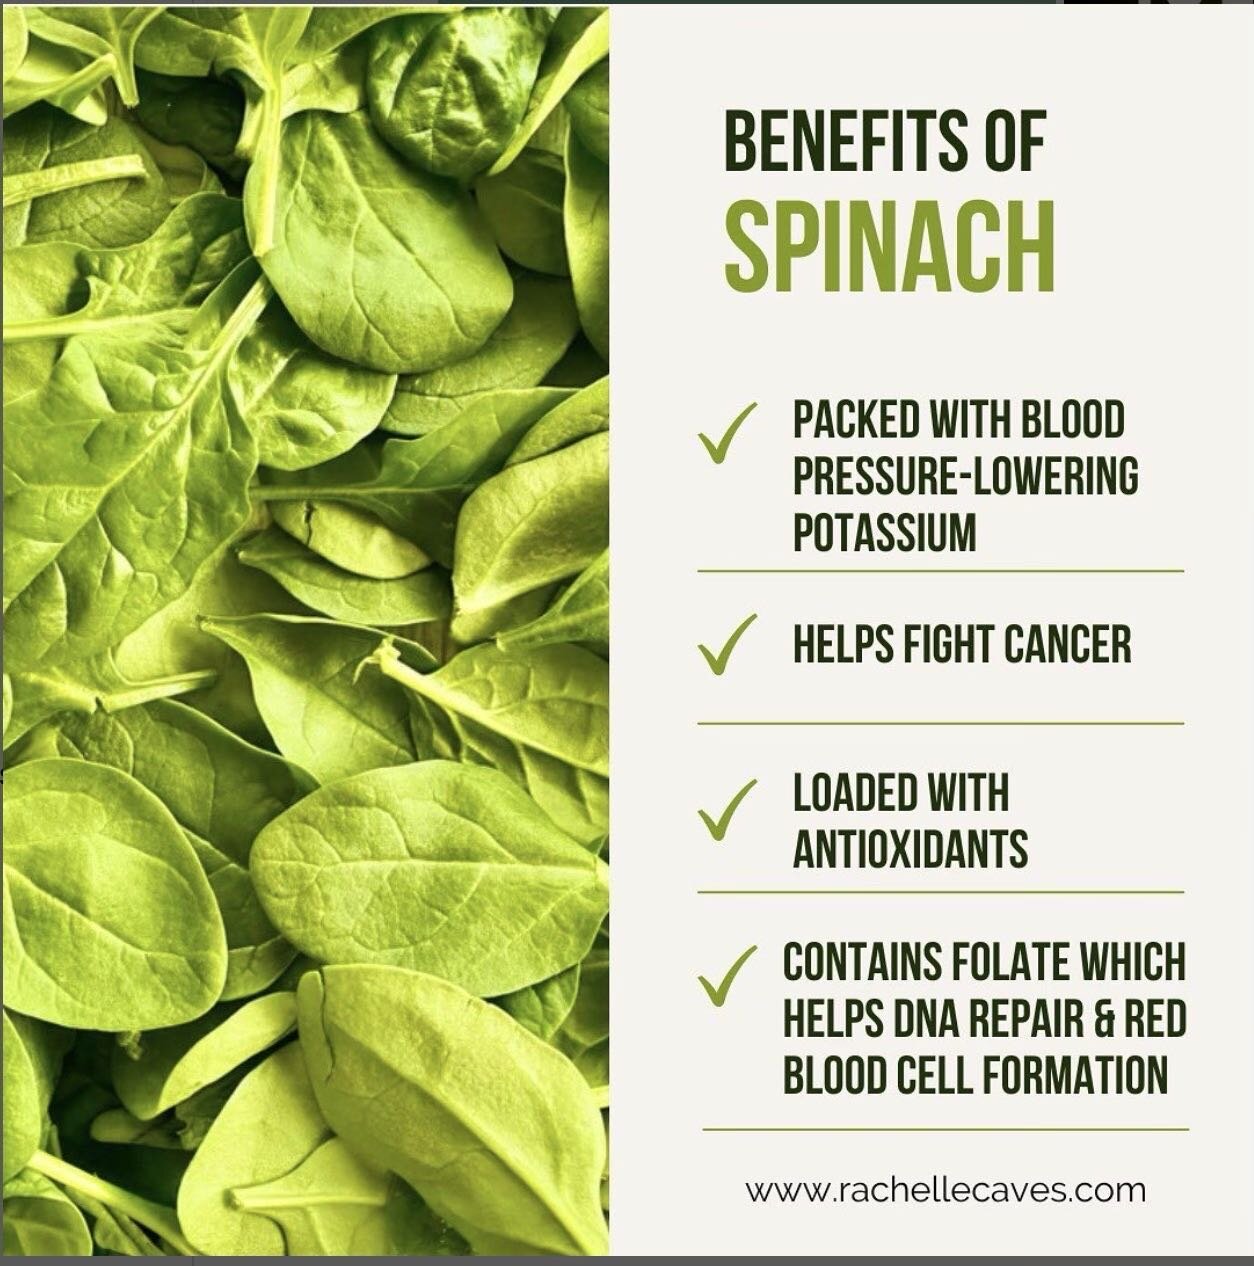 Spinach is an amazingly healthy green leafy veggie that provides your body with a plethora of cell-protecting nutrients.

An EASY &amp; DELICIOUS way to get your spinach in first thing is by tossing a handful into a green smoothie. Mix it with some n